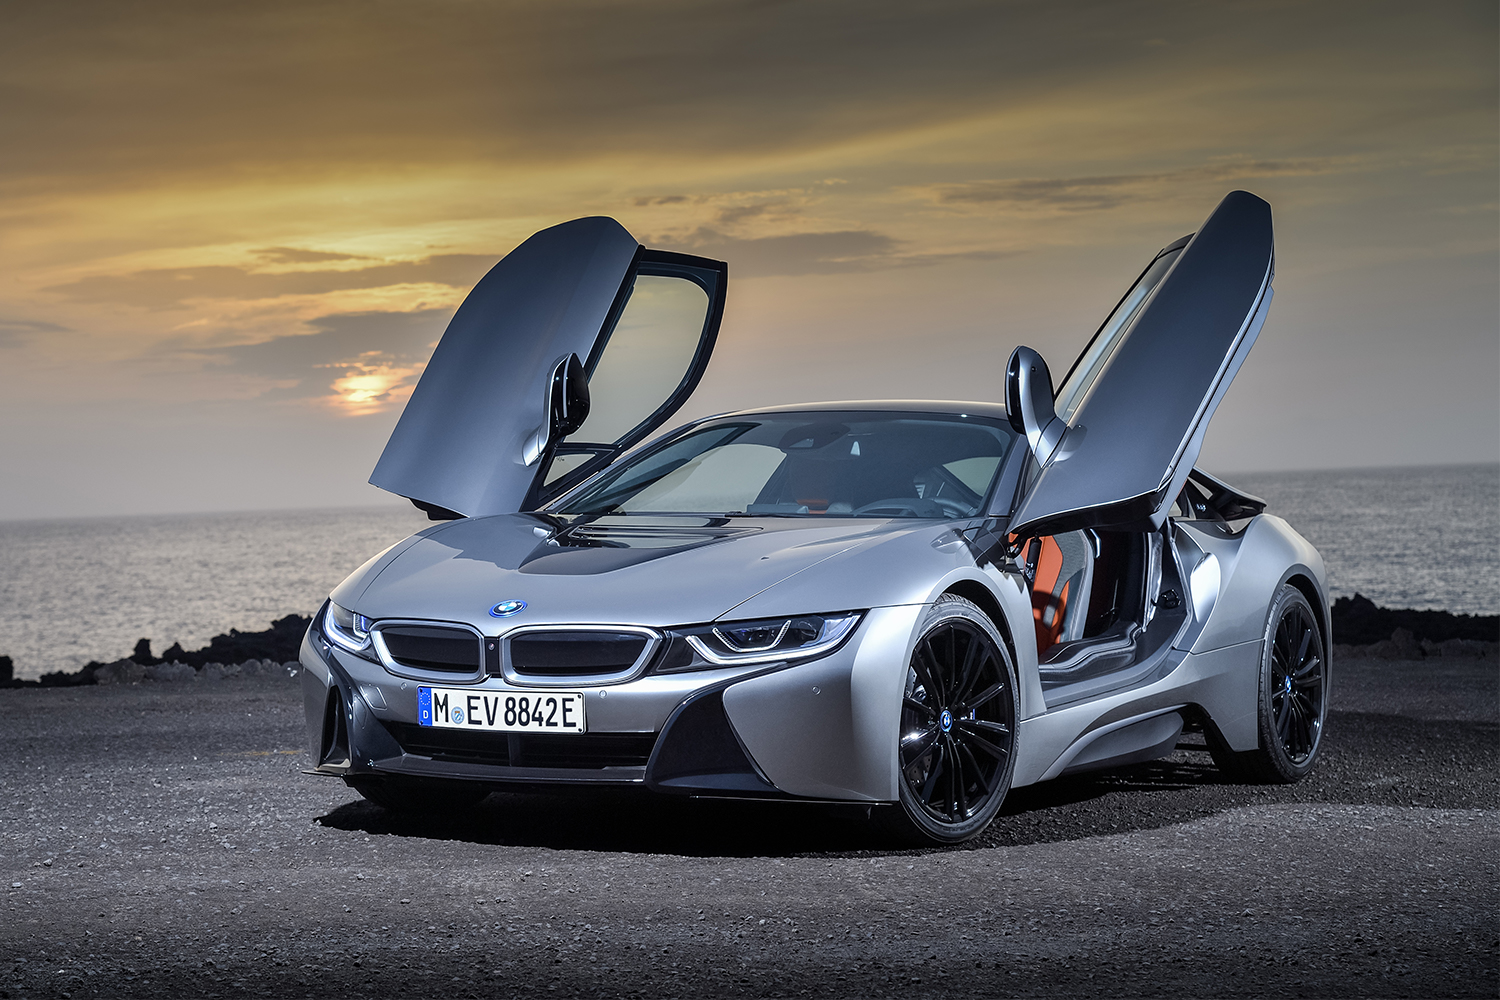 A BMW i8 Coupe at dusk with its winged doors open